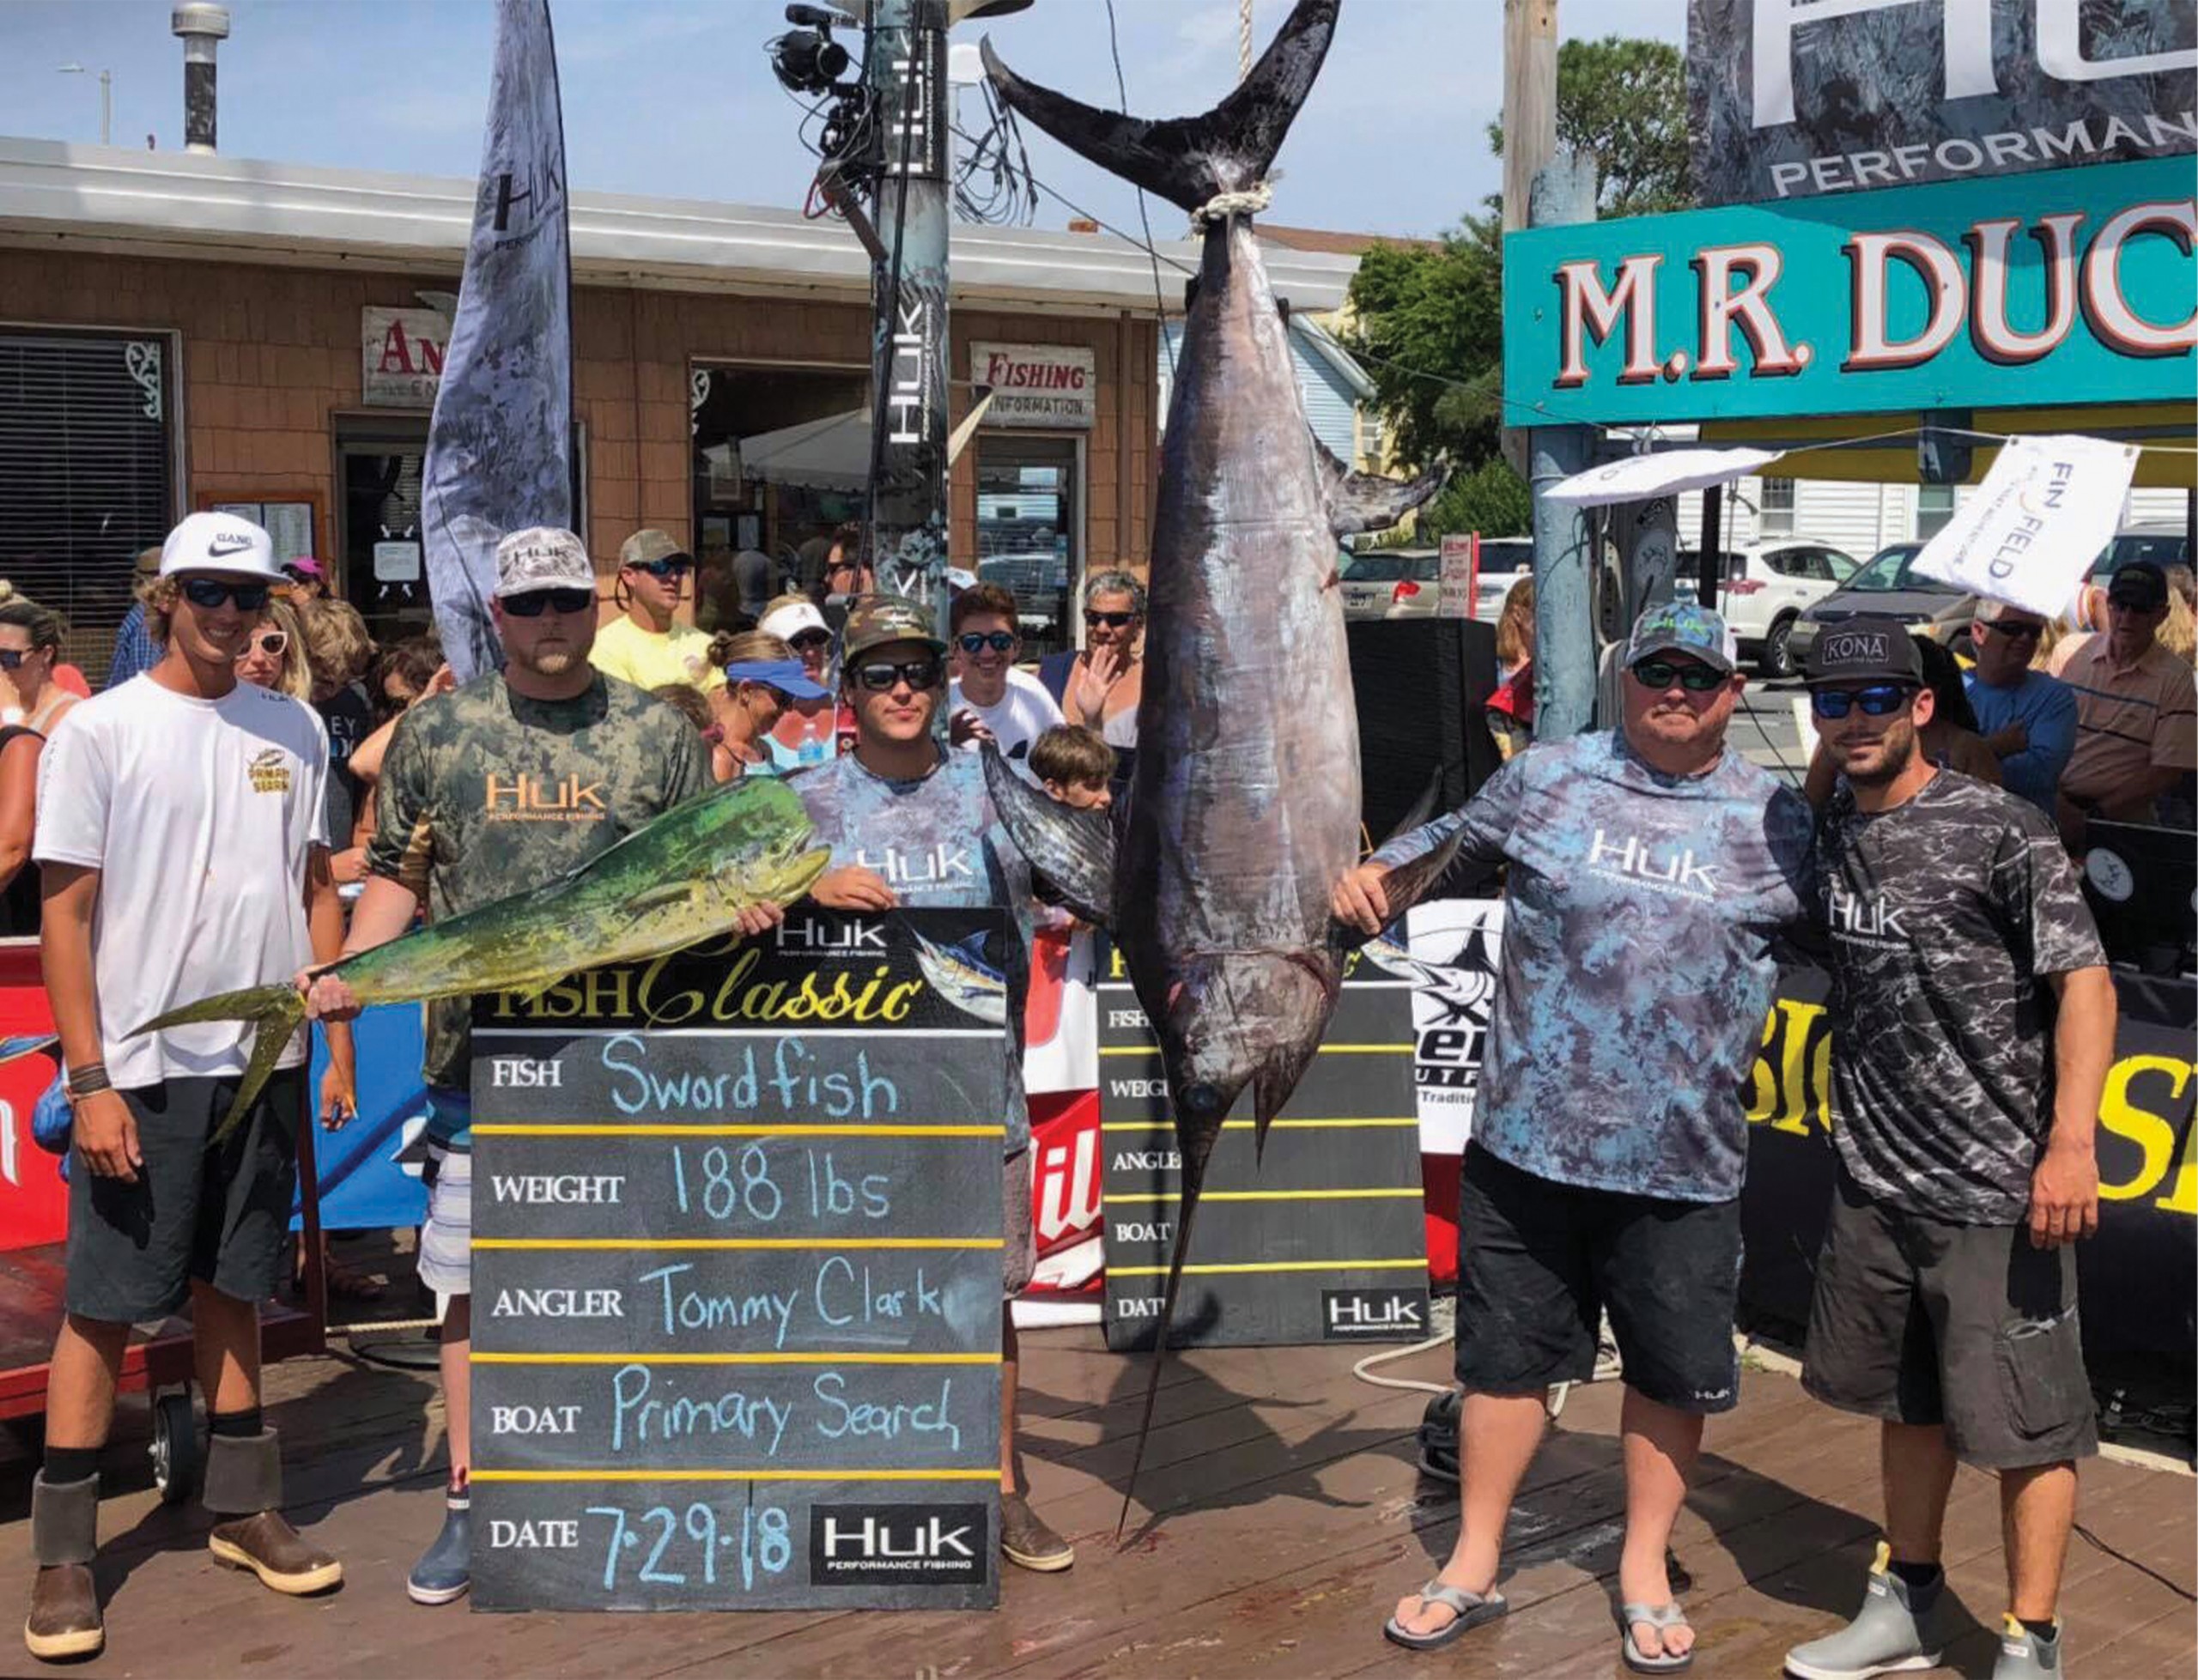 Primary Search crew weighing 188 lbs swordfish in Ocean City, Maryland Capt. Austin Ensor